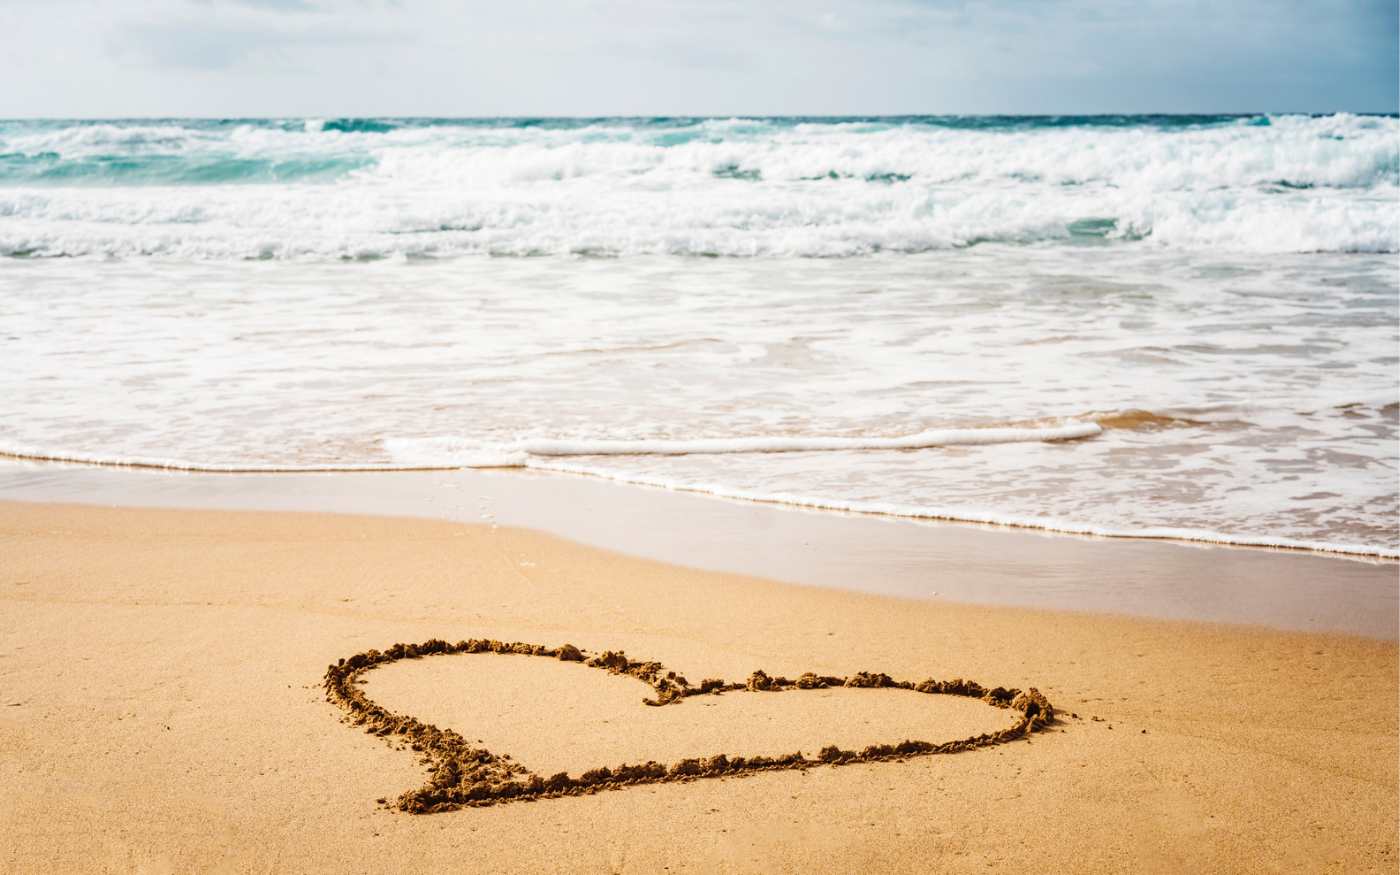 Image of beach sand by the ocean, with a heart shape drawn in the foreground in the sand.